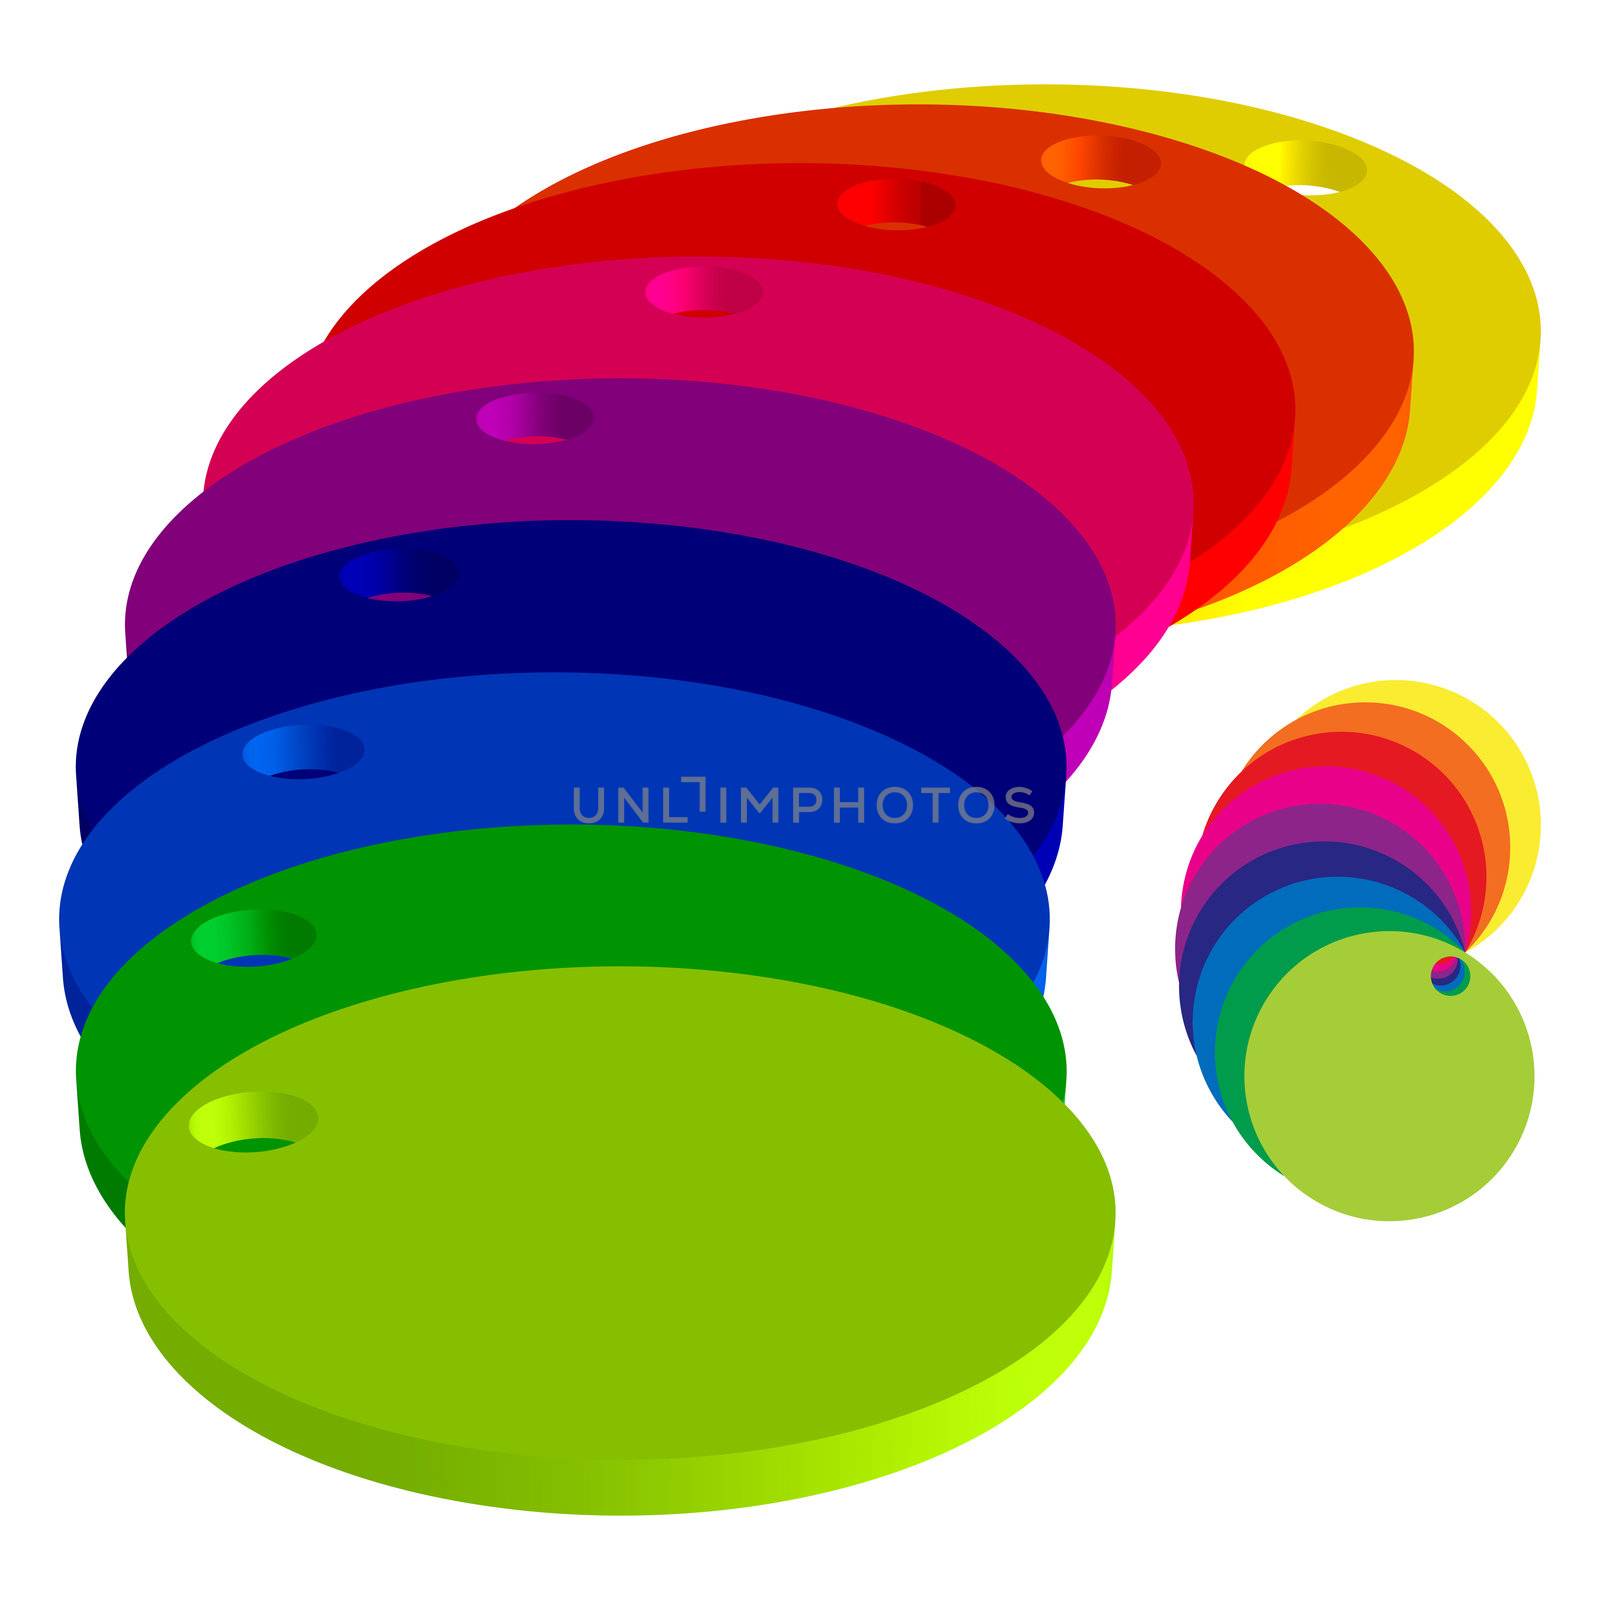 color circles against white background, abstract vector art illustration